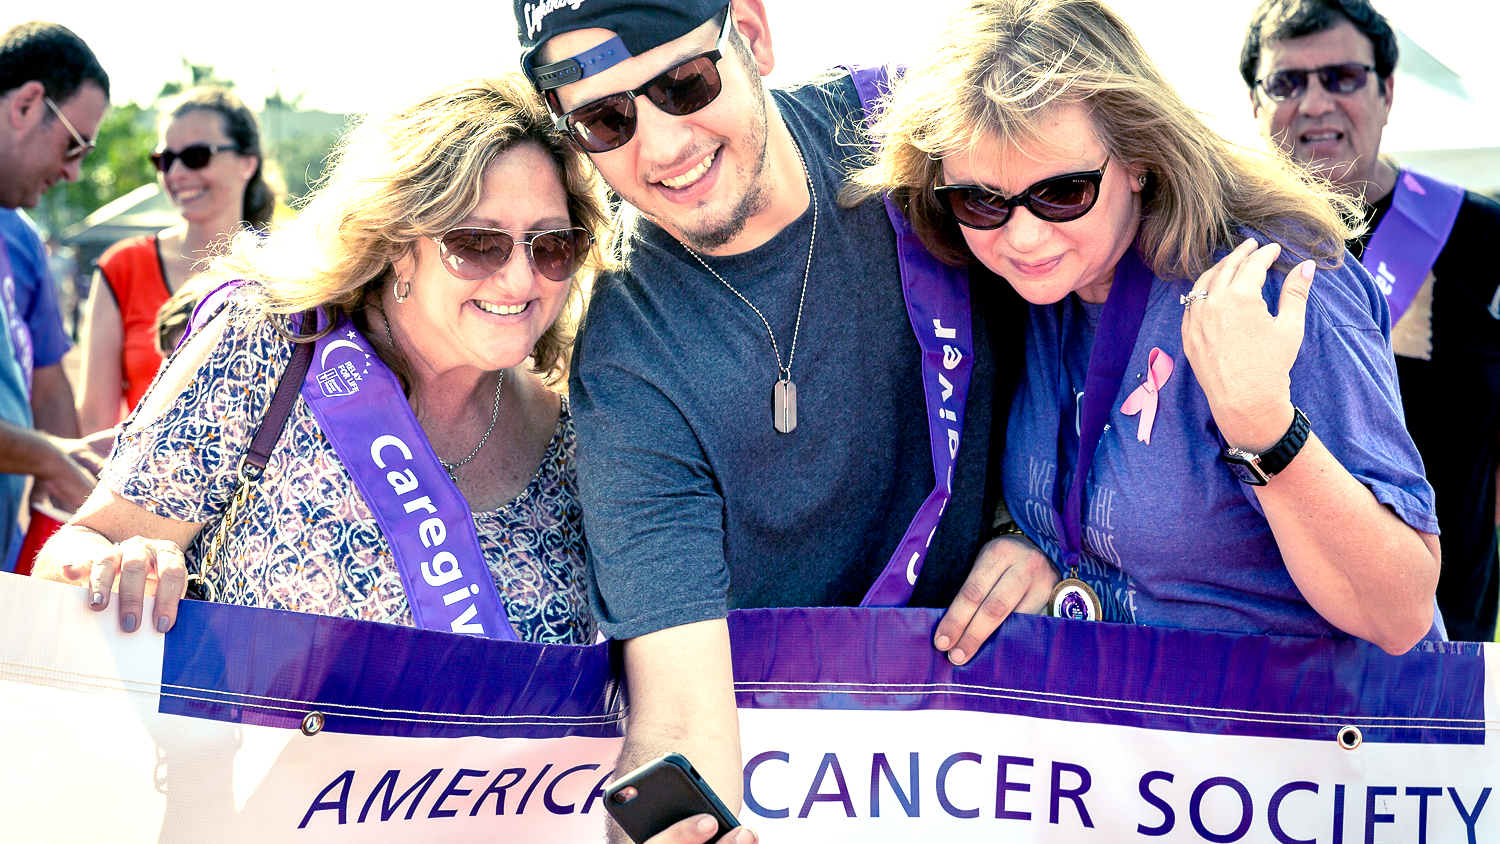 'Survivors Standing Strong' at Relay For Life Parkland Coral Springs April 13 2